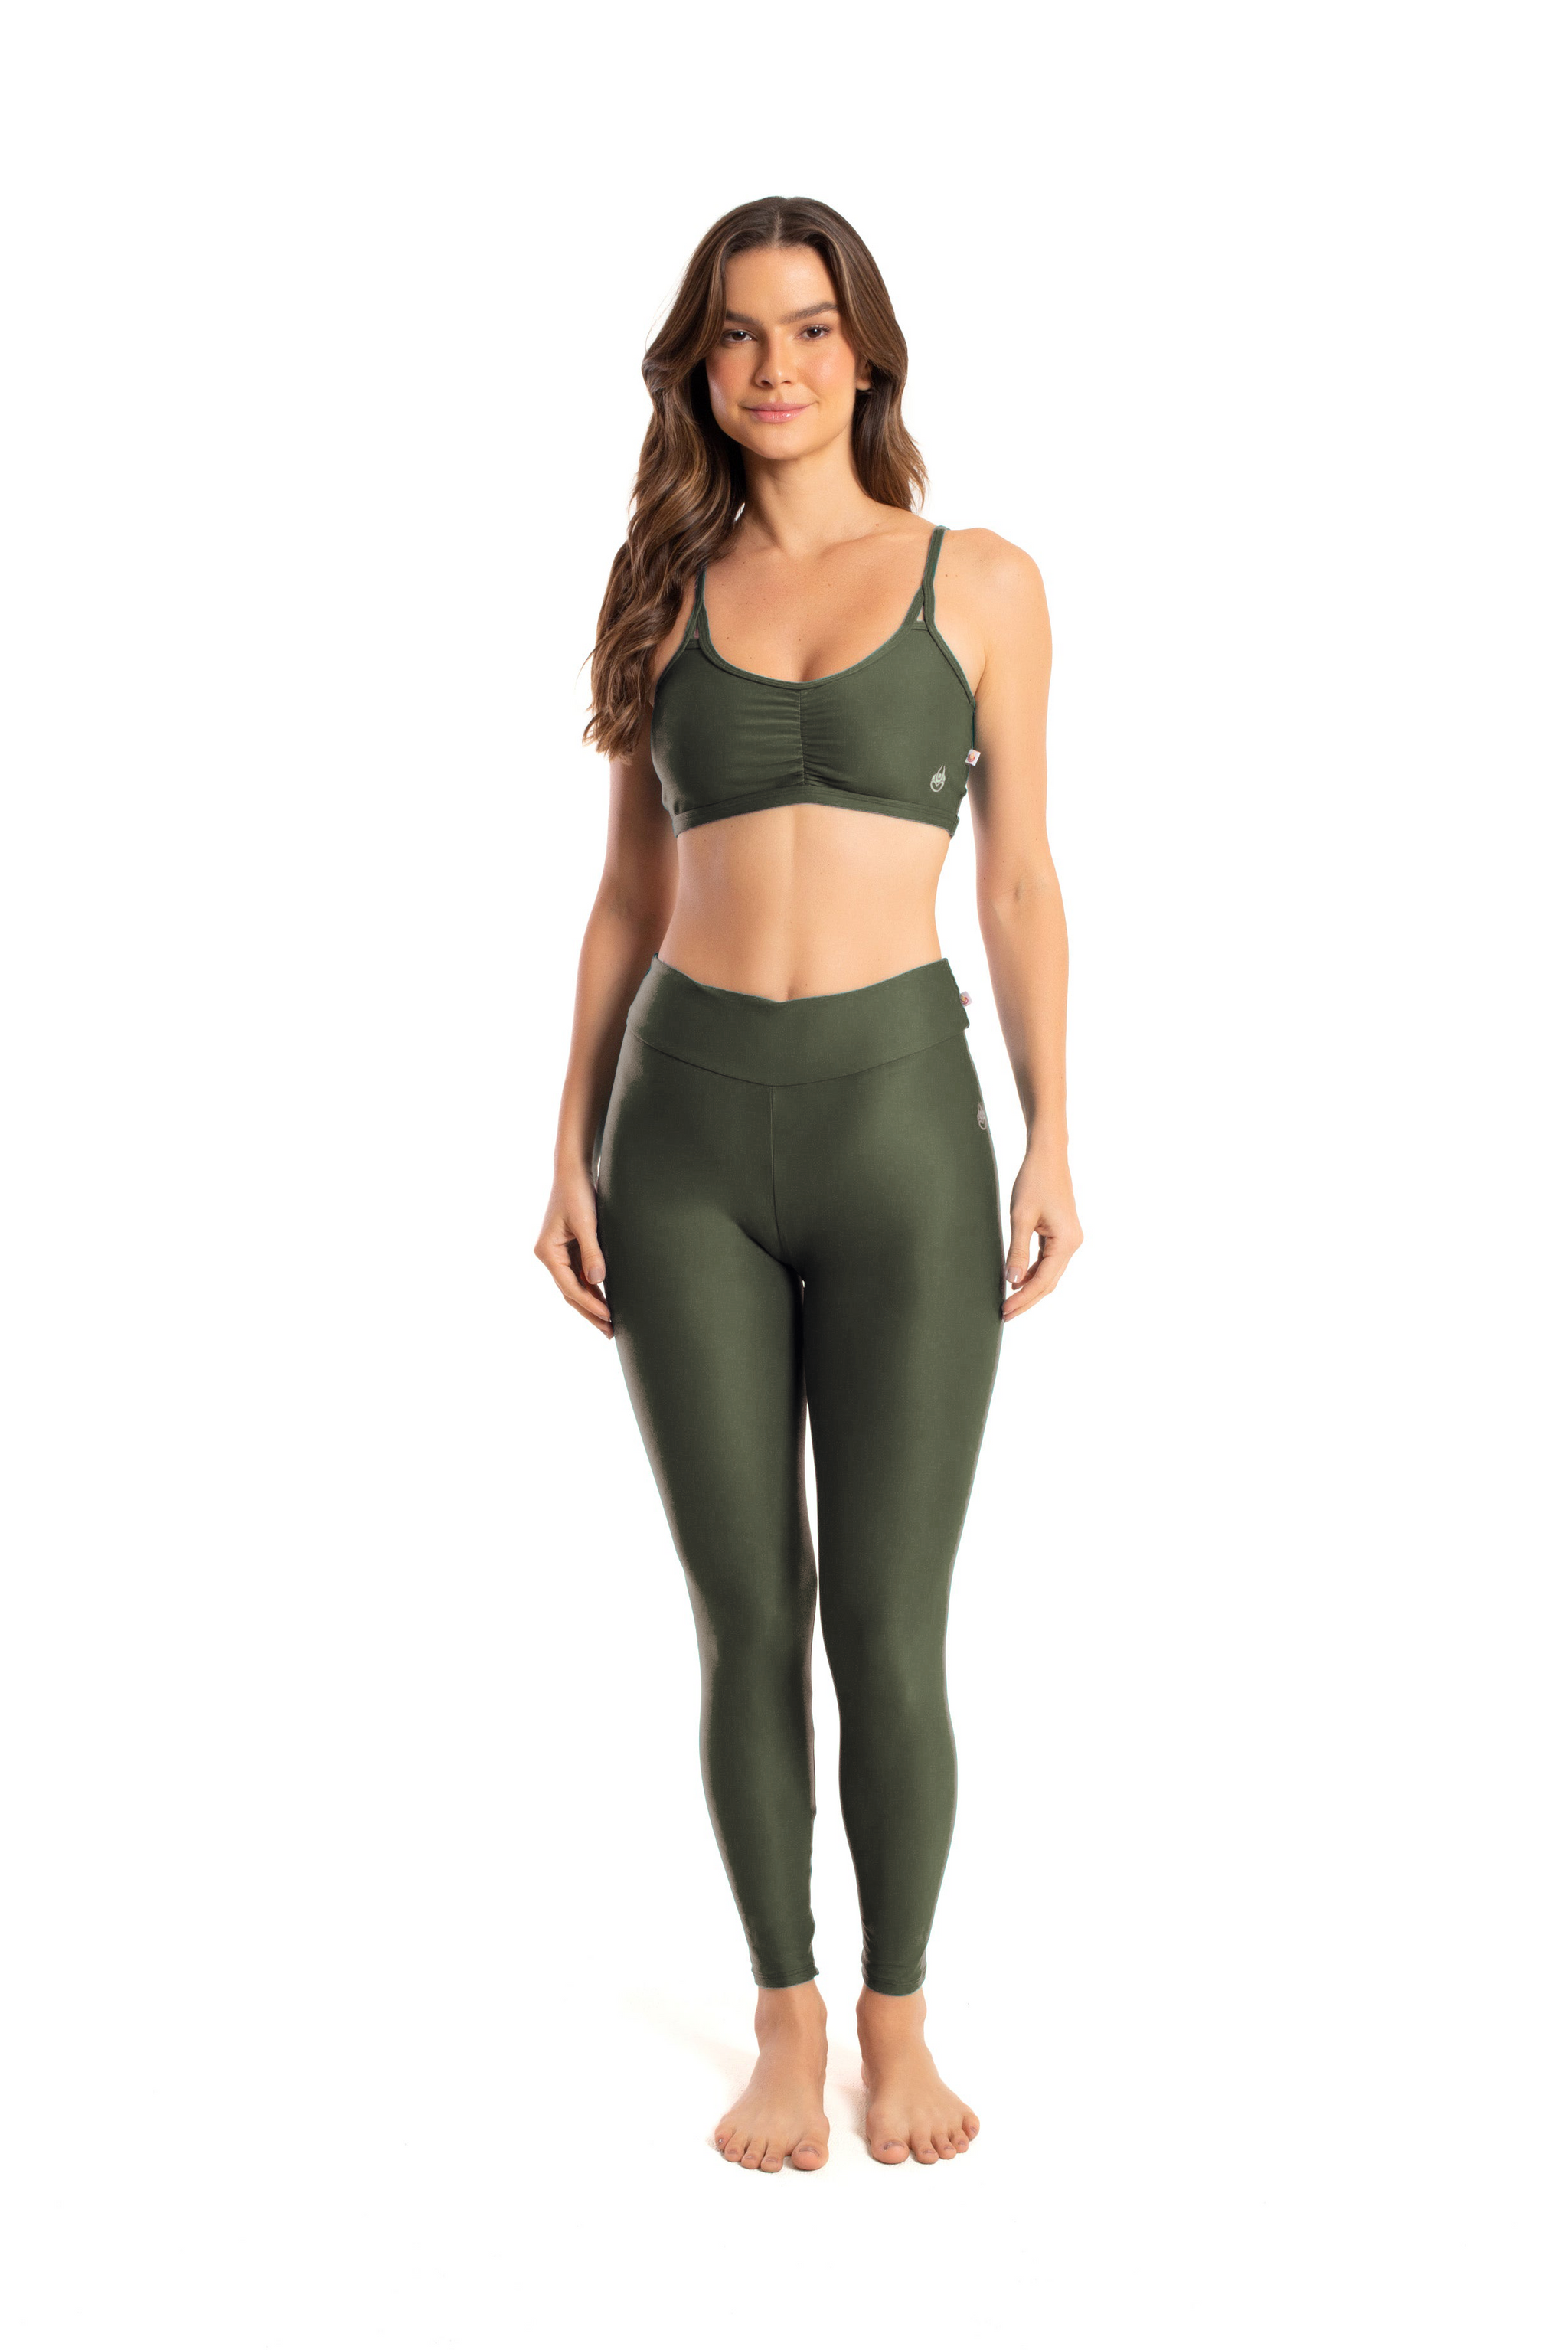 Women's Scrunch Butt Lift Leggings High Waisted Seamless Booty Yoga Pants  Athletic Gym Workout Leggings for Women (Army Green, S) at  Women's  Clothing store